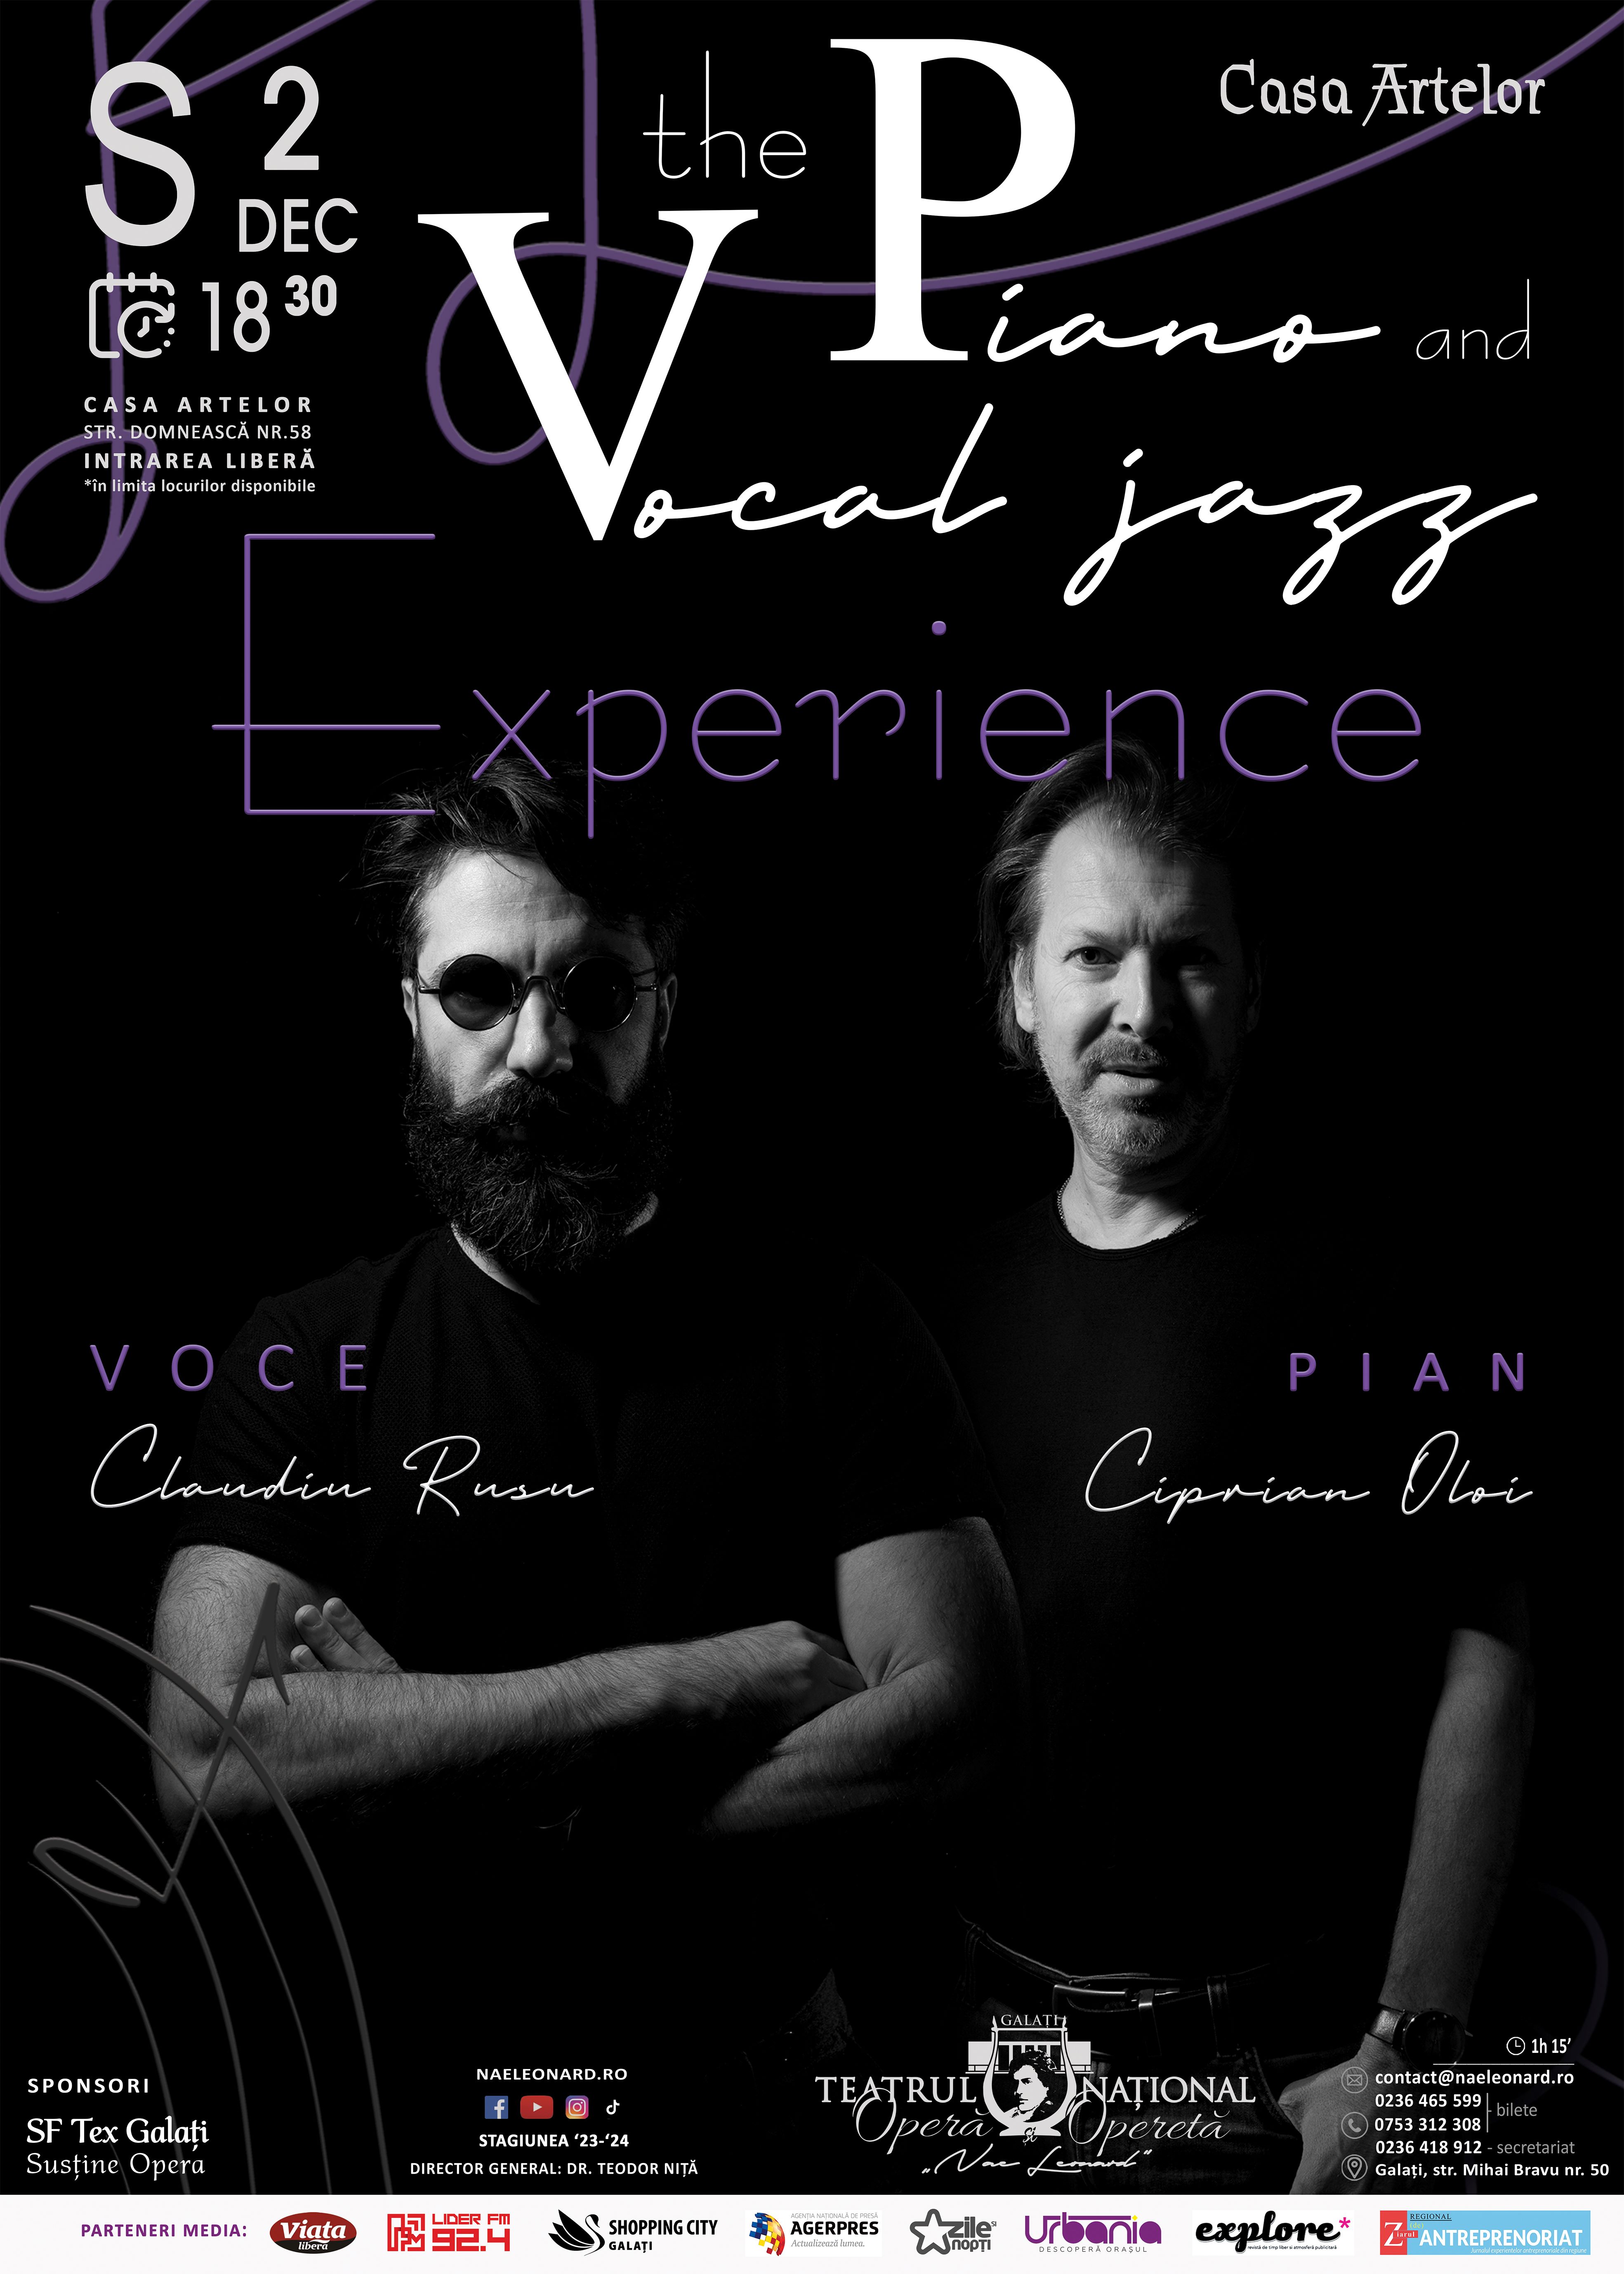 The Piano and Vocal Jazz Experience